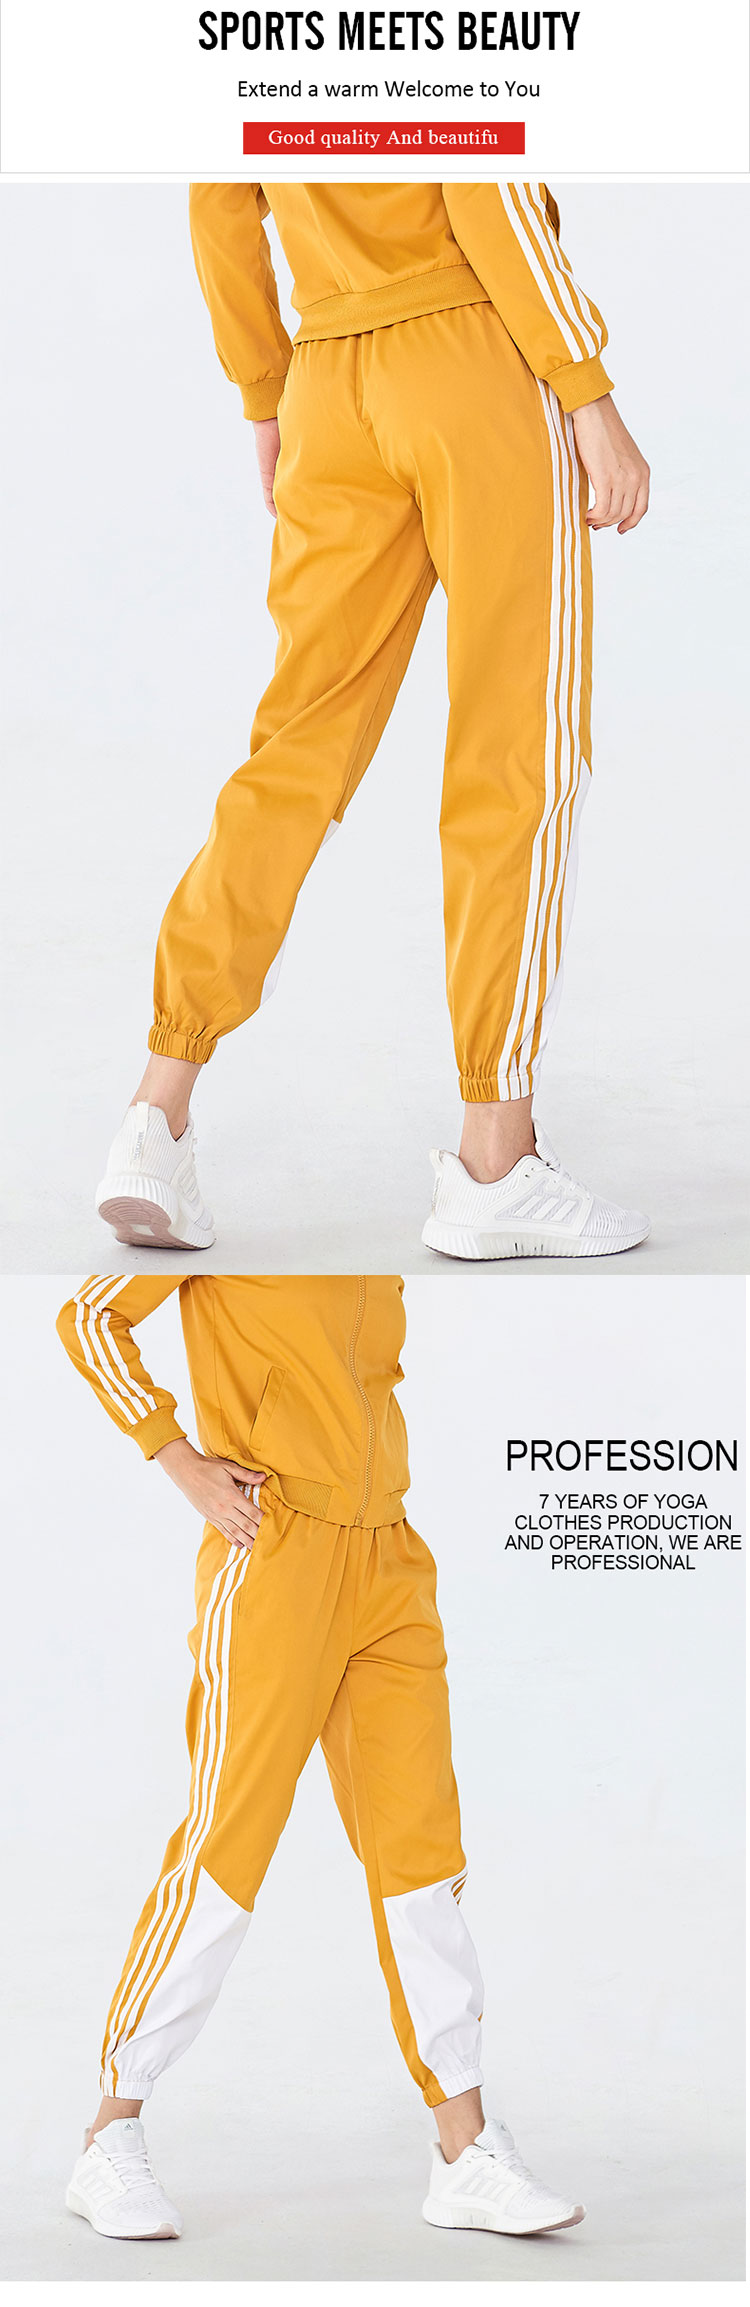 The-surface-presents-the-yellow-gym-leggings-with-good-transmission-of-light